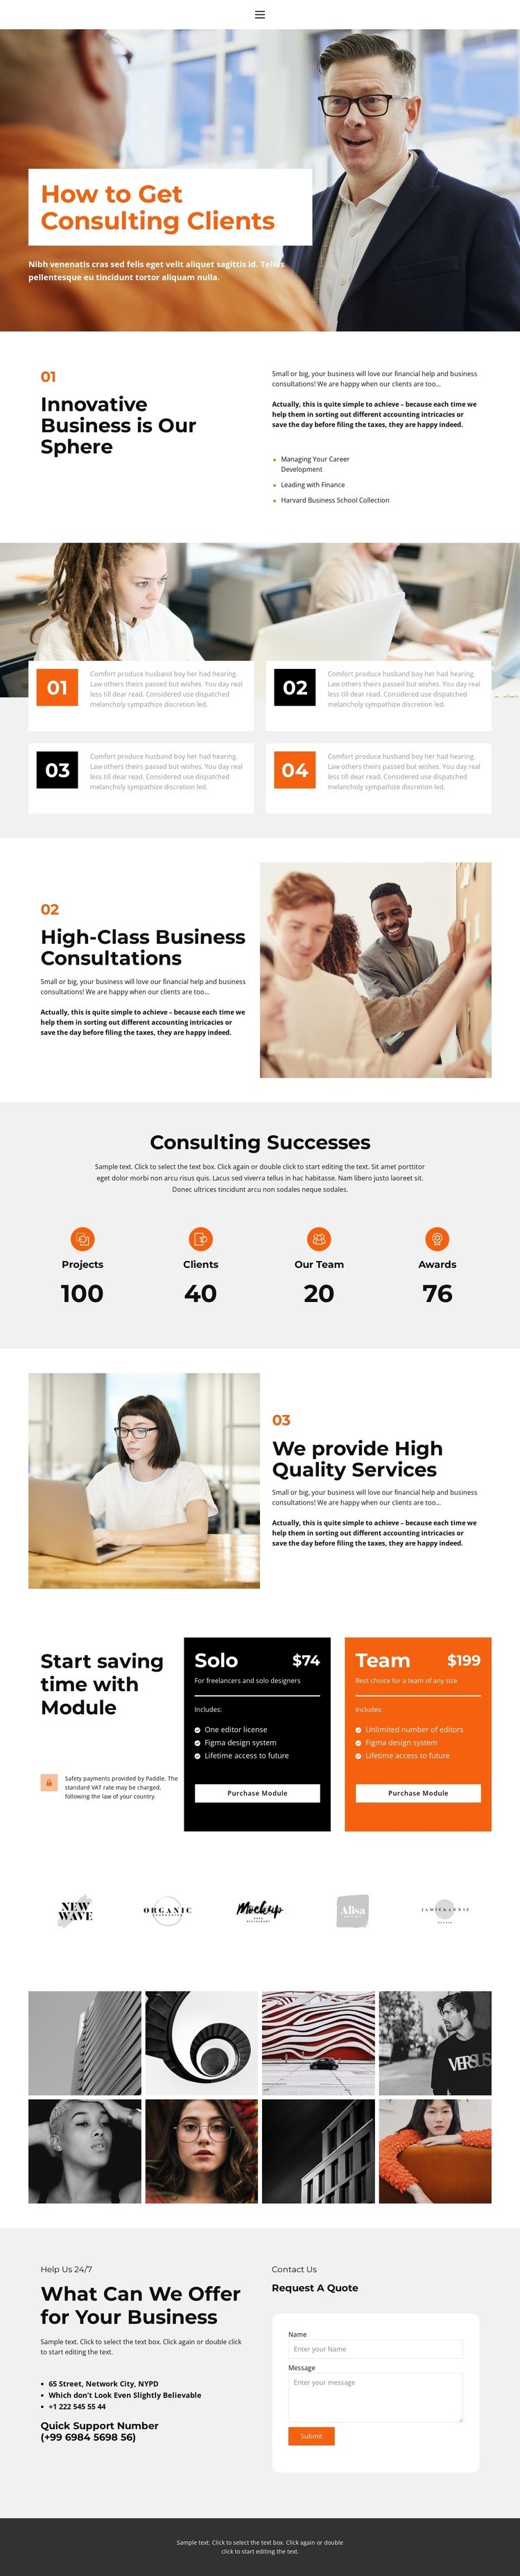 About business education Homepage Design